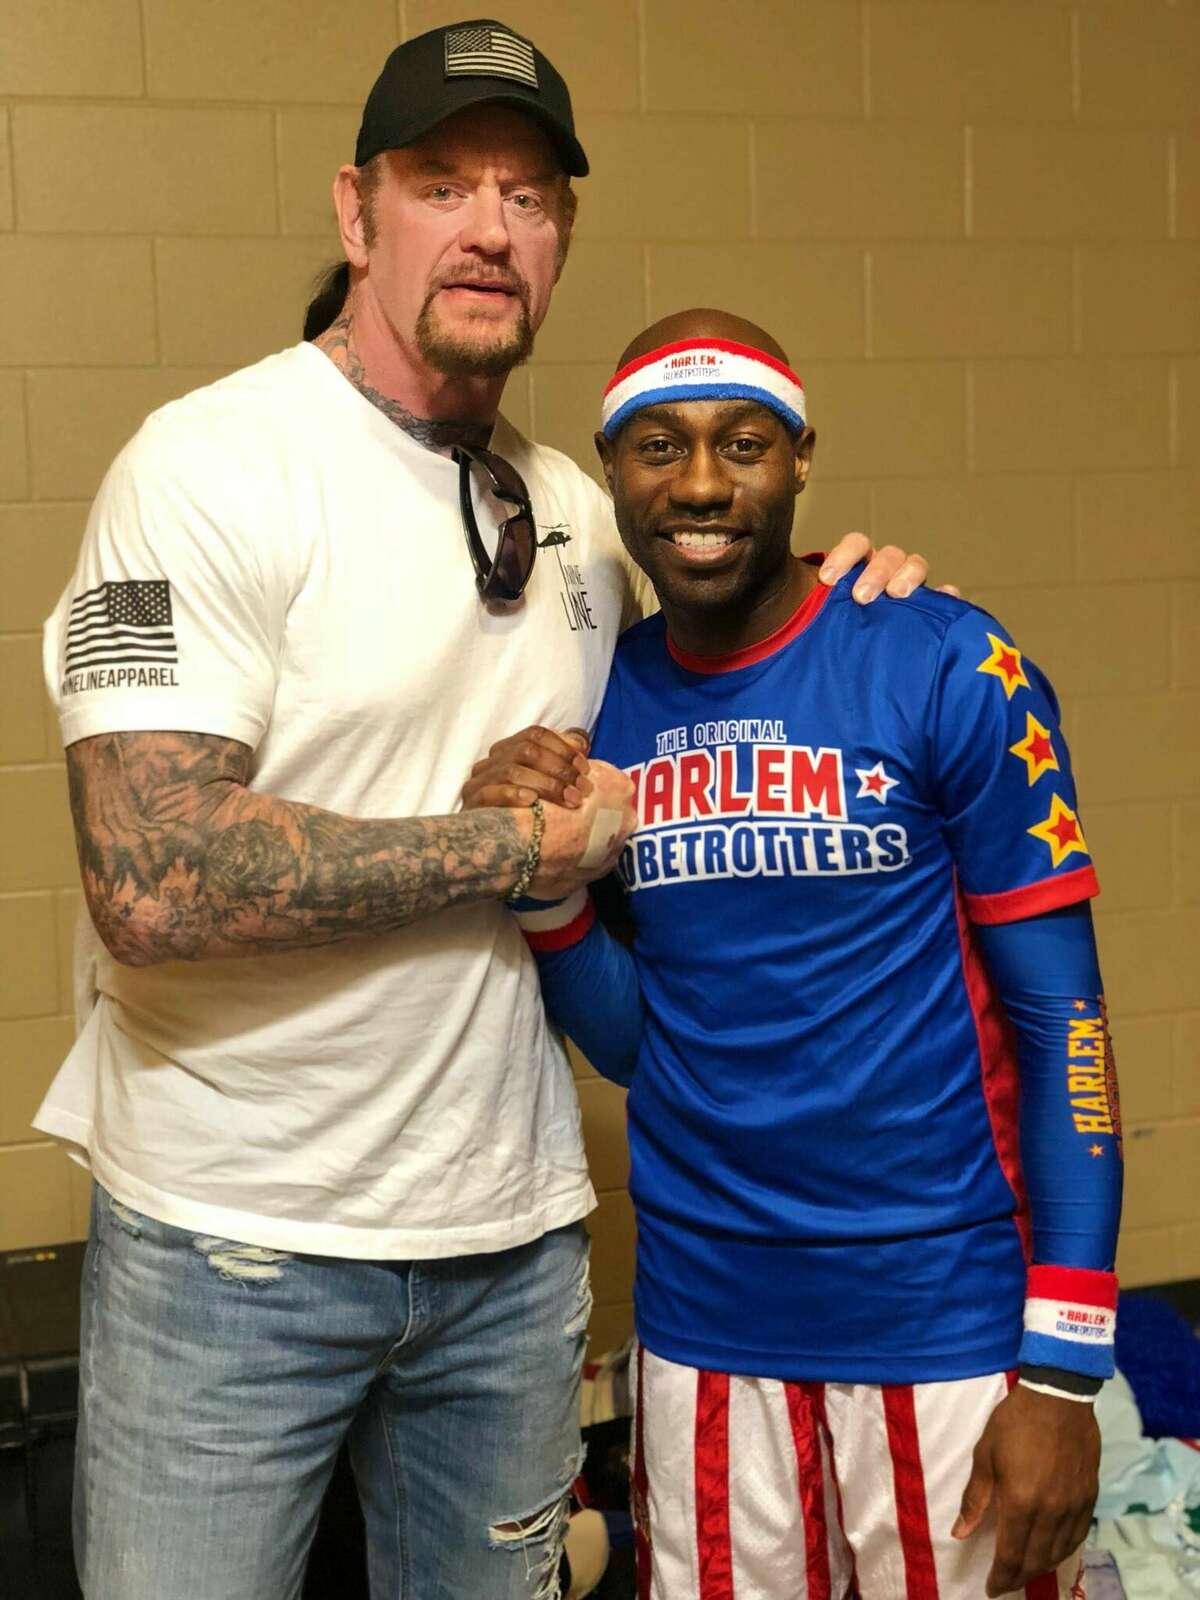 2. The only time I watch TV is on Monday and Friday (Monday Night Raw and Smackdown). I am a huge fan of WWE. One of my all-time favorite WWE superstars is The Undertaker and I got to meet him. Going to WrestleMania is at the top of my bucket list. One day.